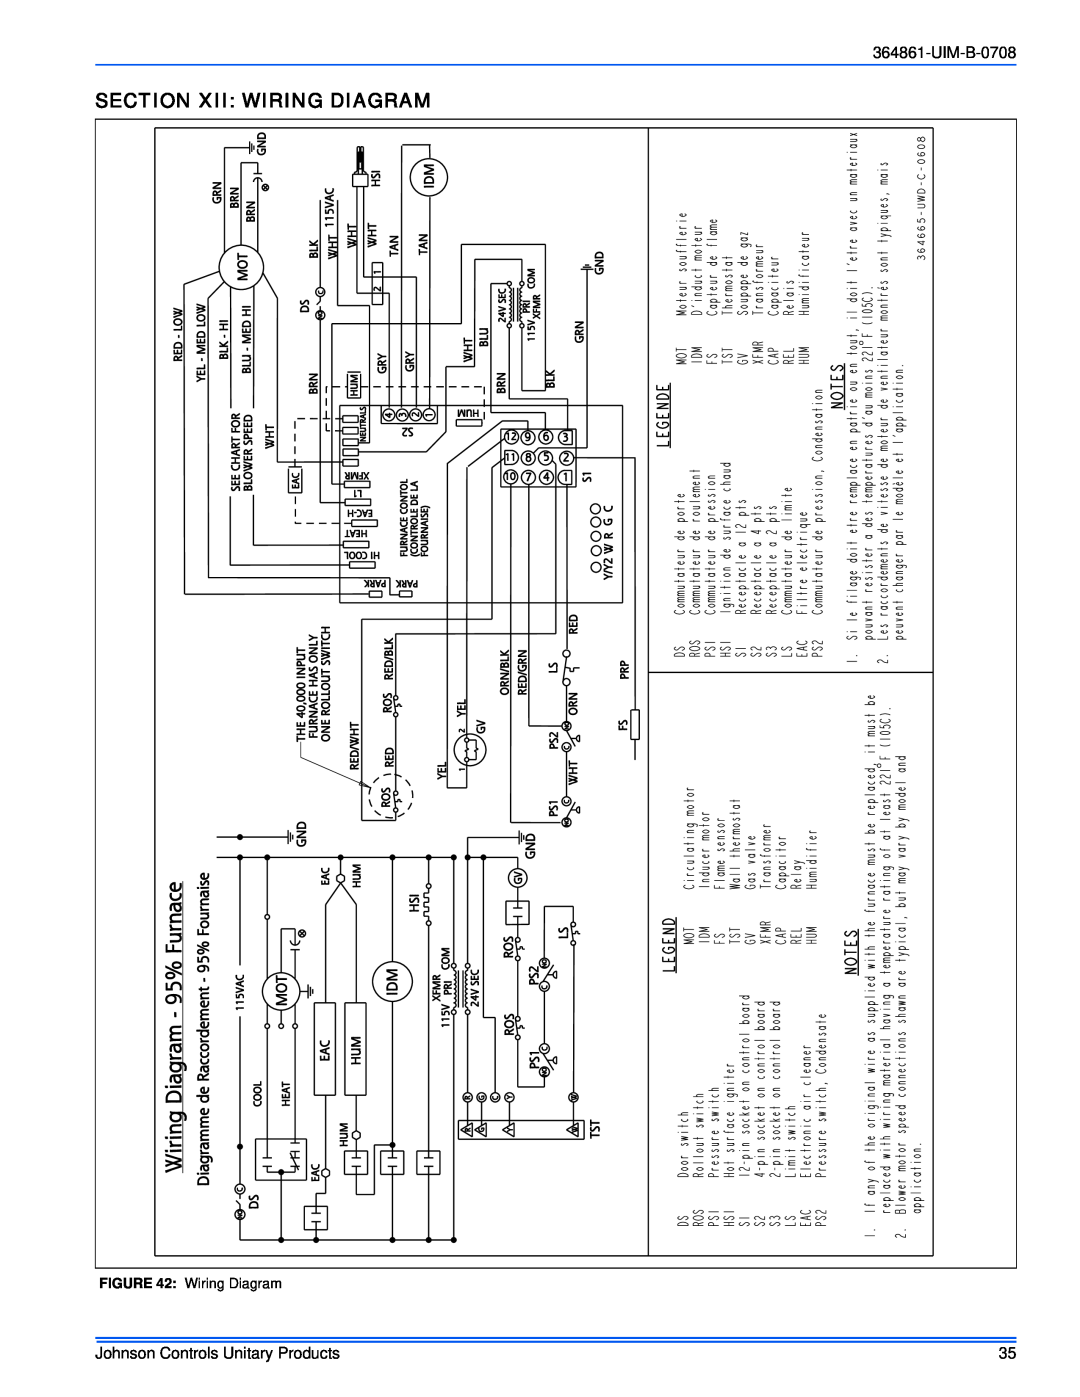 Johnson Controls GG9S*MP, TG9S*MP Section Xii: Wiring Diagram, UIM-B-0708, Johnson Controls Unitary Products 